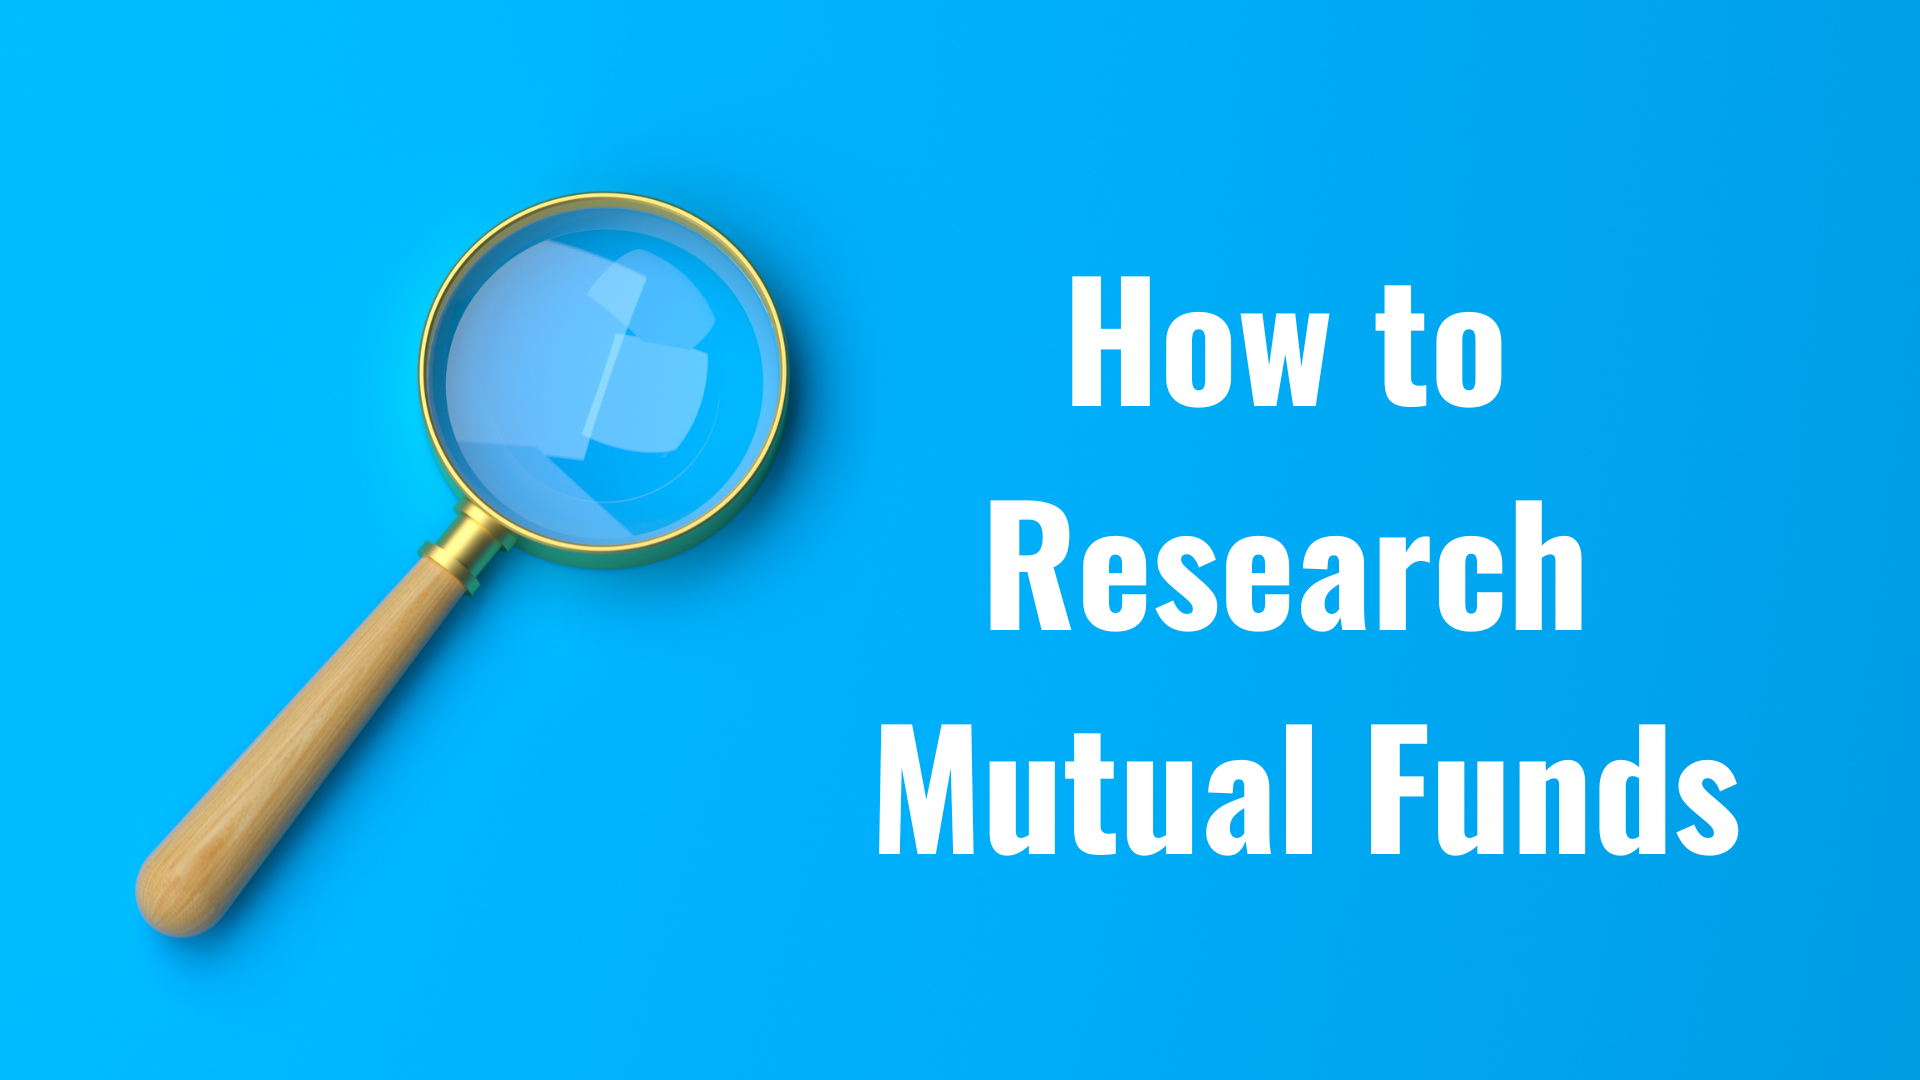 How to Research Mutual Funds